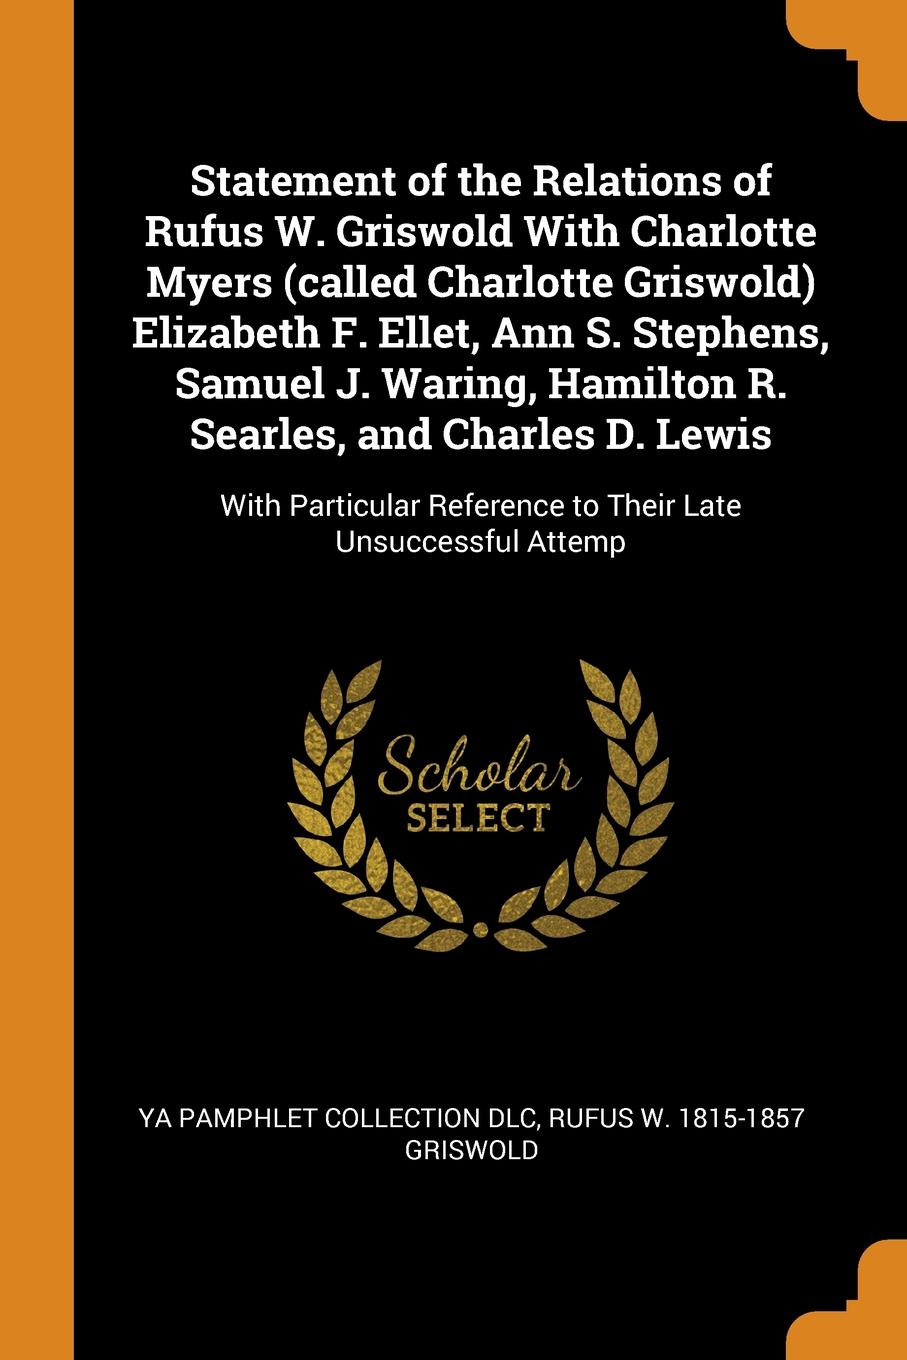 Statement of the Relations of Rufus W. Griswold With Charlotte Myers (called Charlotte Griswold) Elizabeth F. Ellet, Ann S. Stephens, Samuel J. Waring, Hamilton R. Searles, and Charles D. Lewis. With Particular Reference to Their Late Unsuccessful...